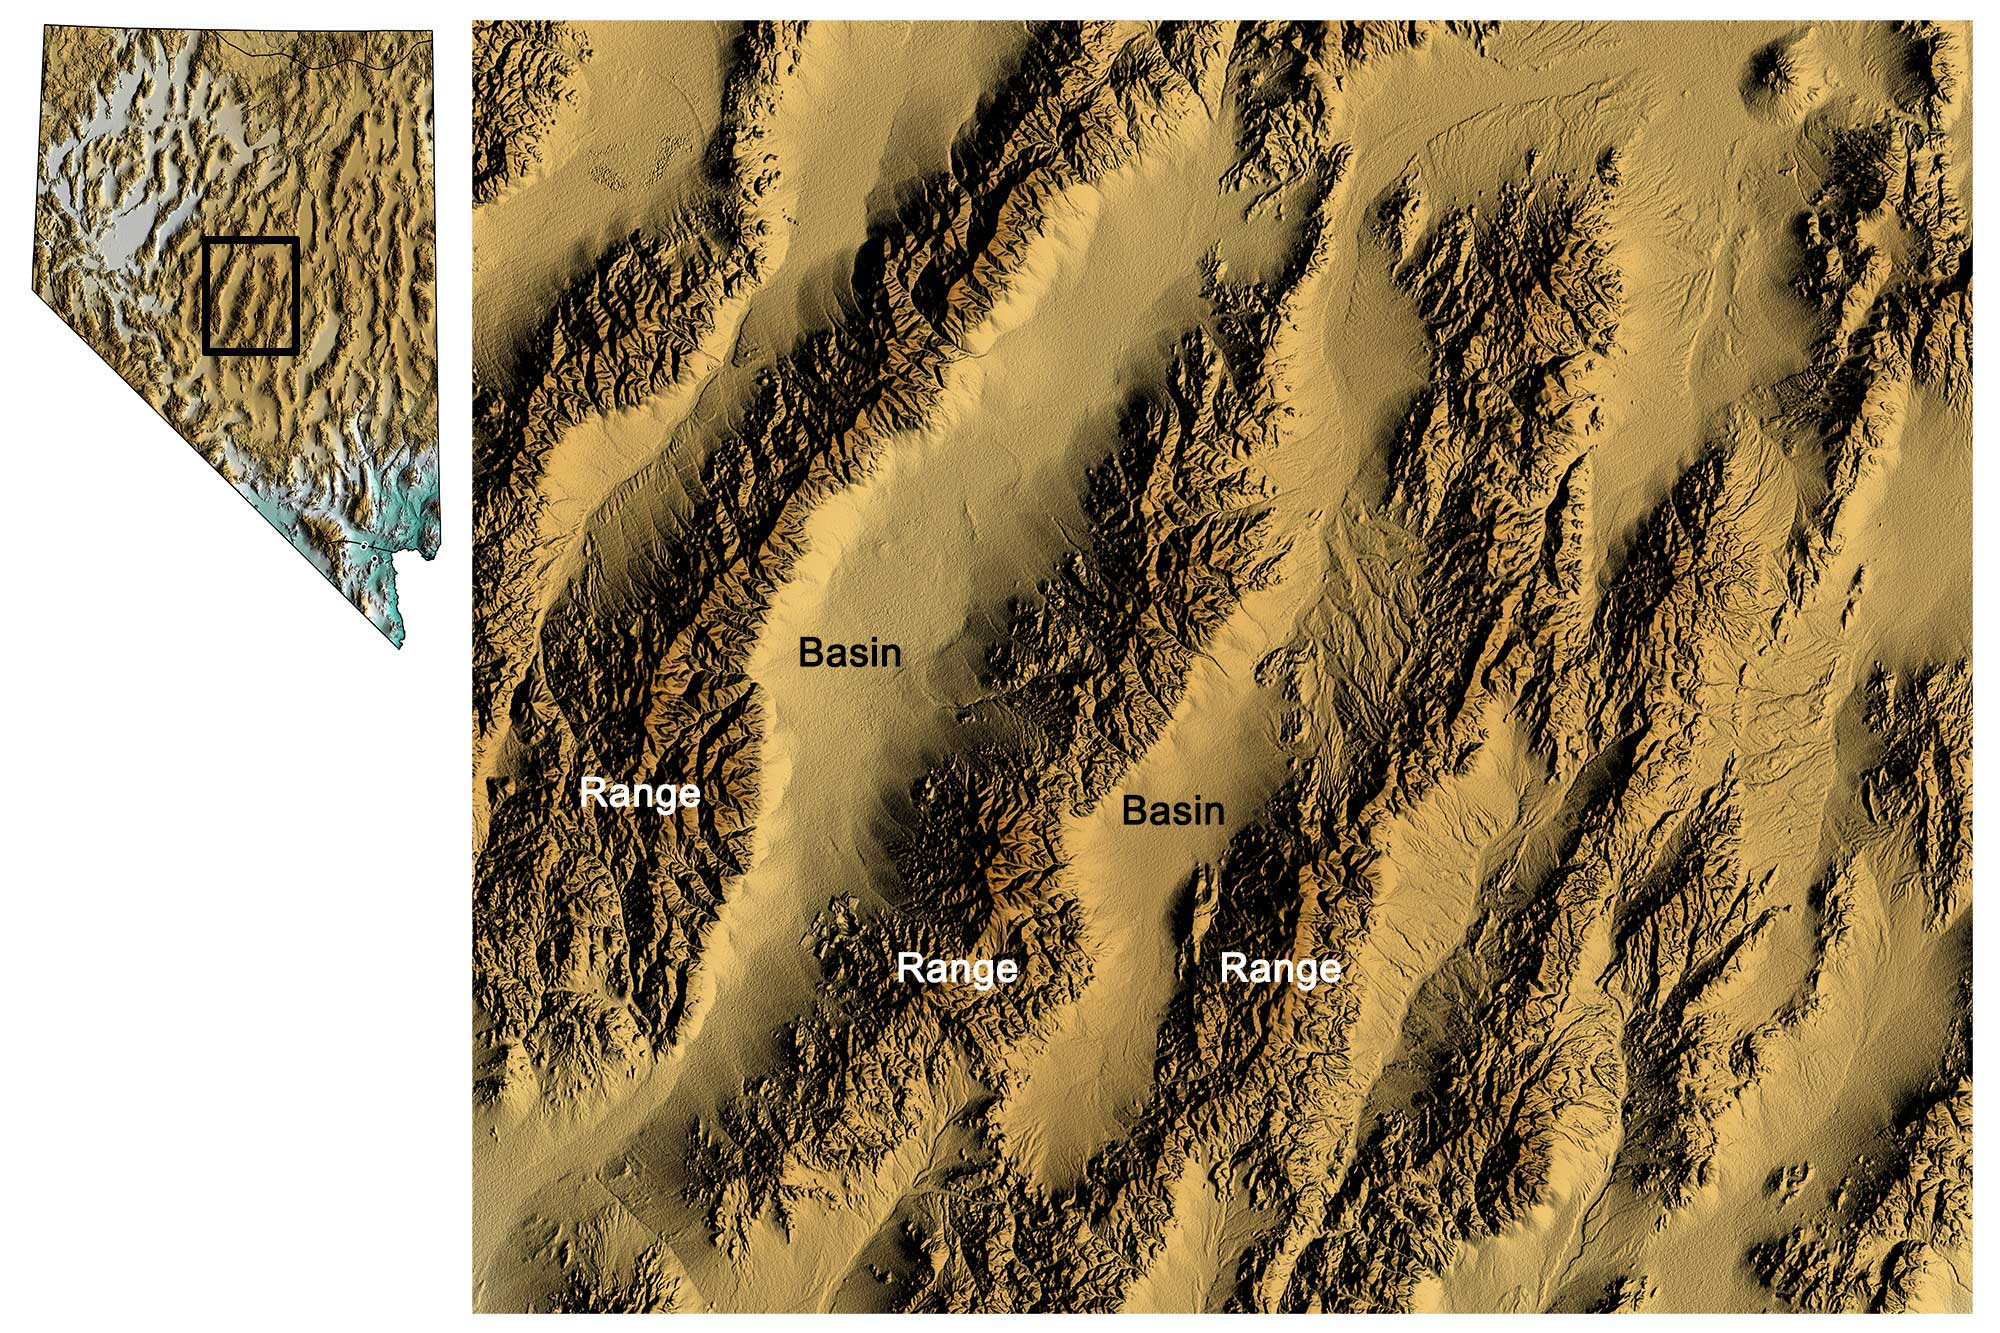 Map showing basin and range topography in central Nevada.